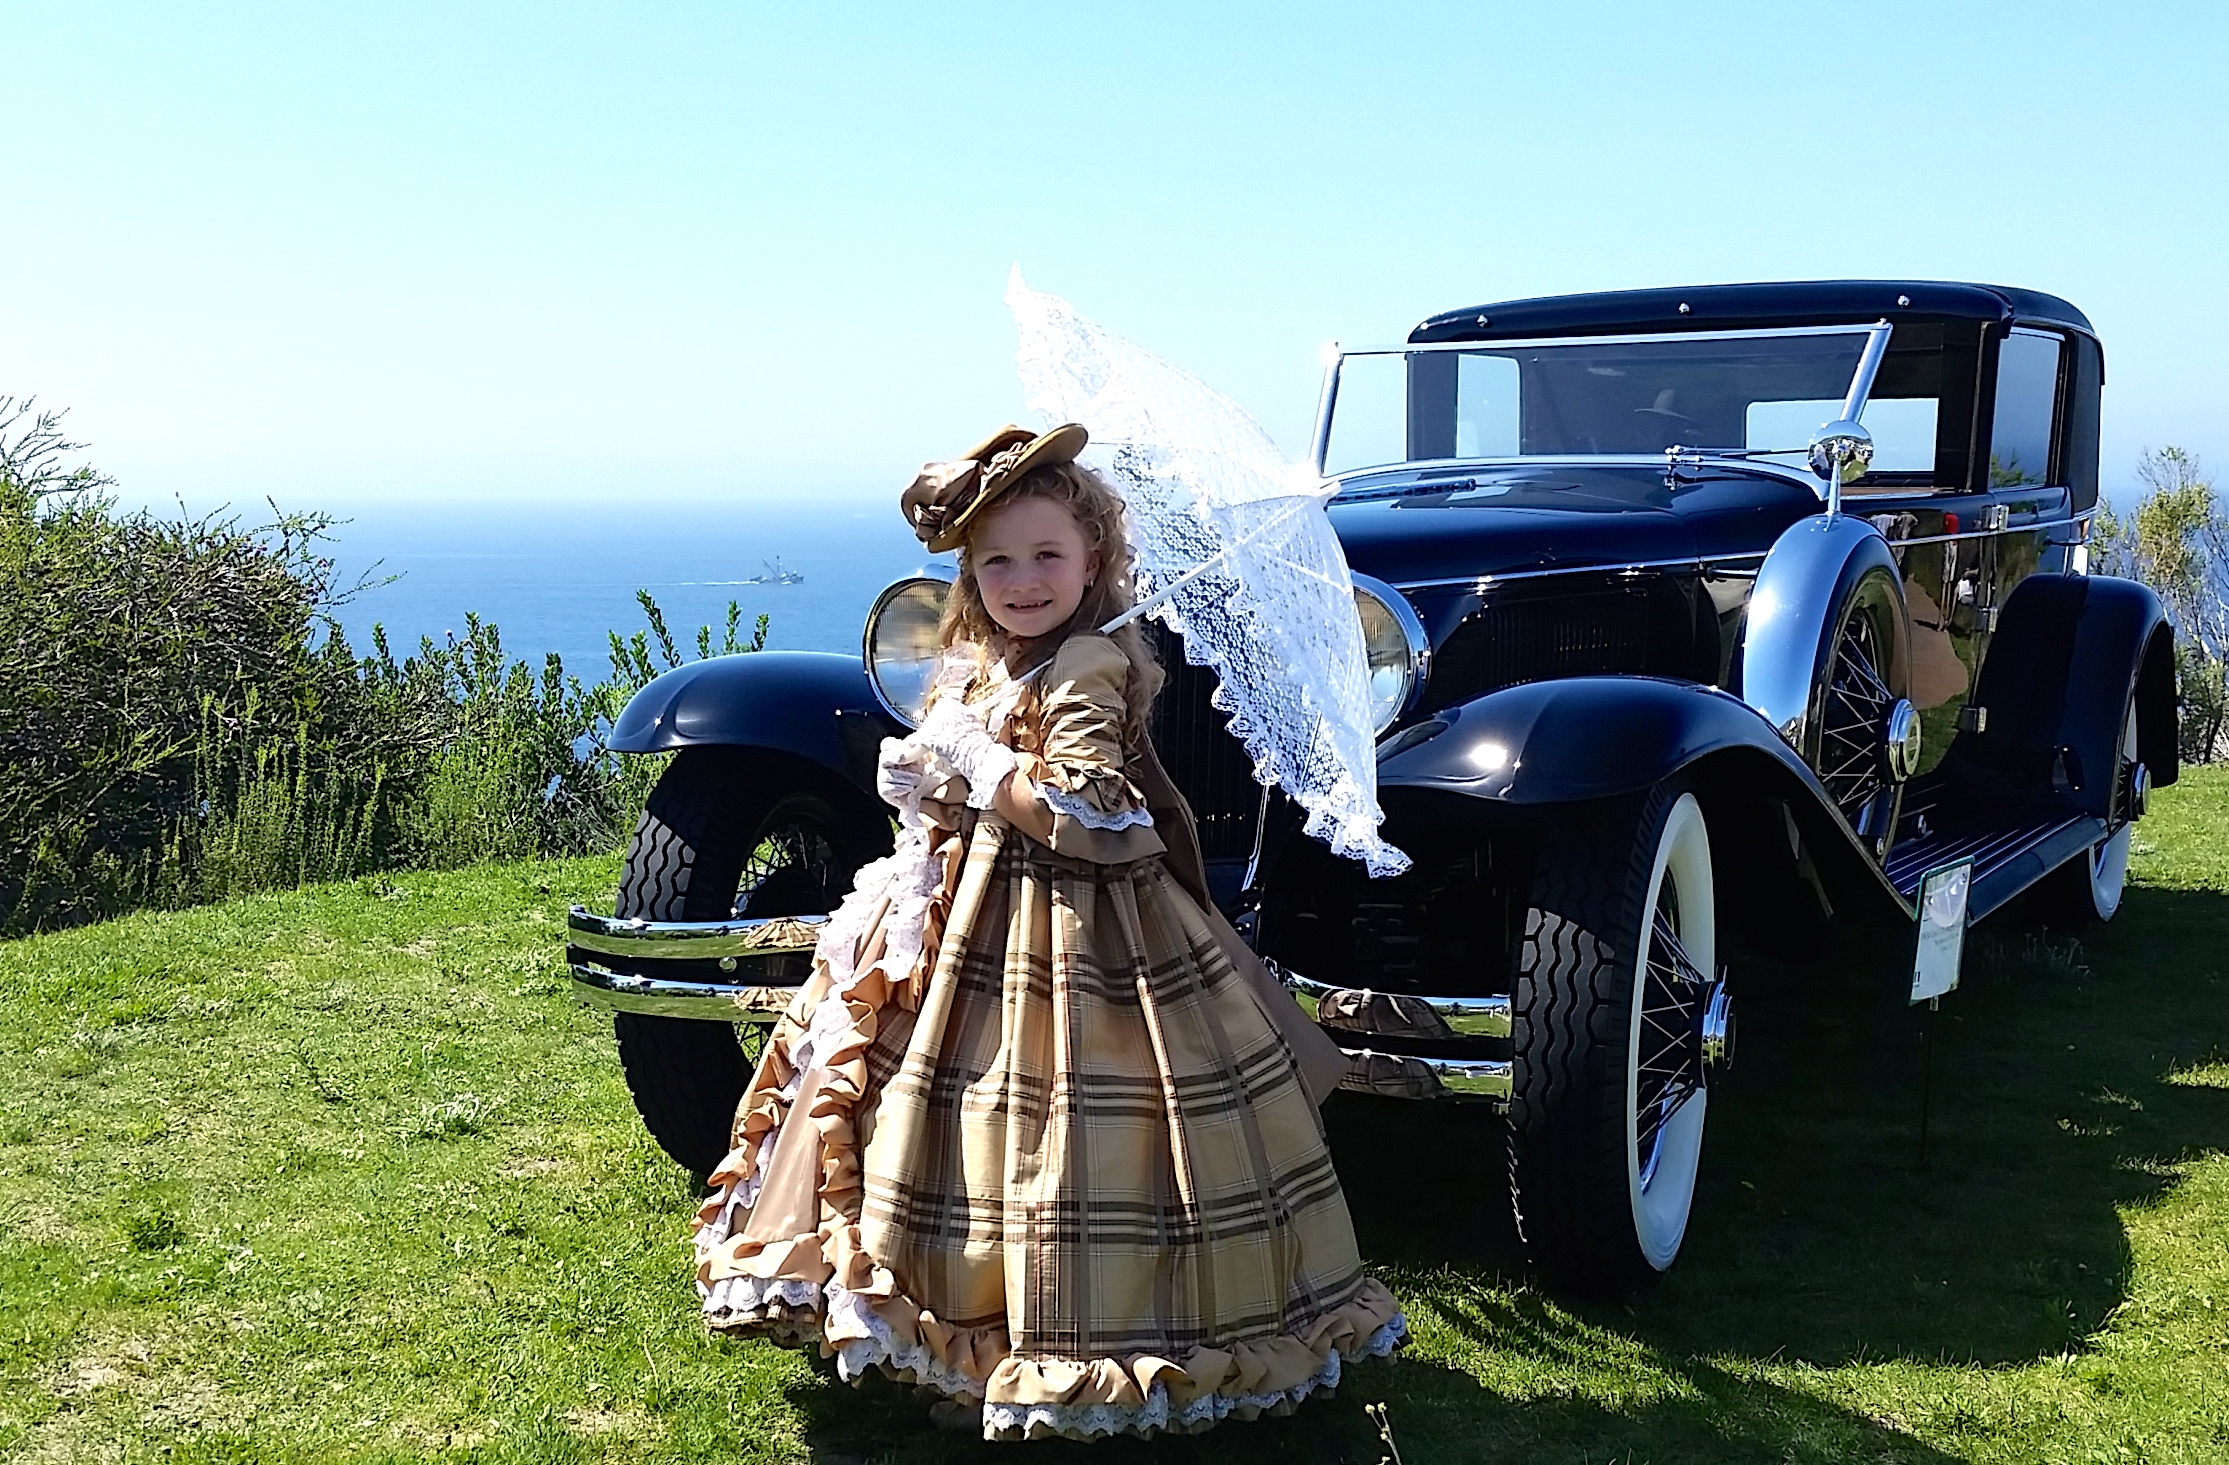 Rosanna at 2014 PV Concours D'Elegance Pleasure Road Rallye and Gala Celebrating Automotive Innovation. Vintage Dress custom designed and made by Oxana Foss